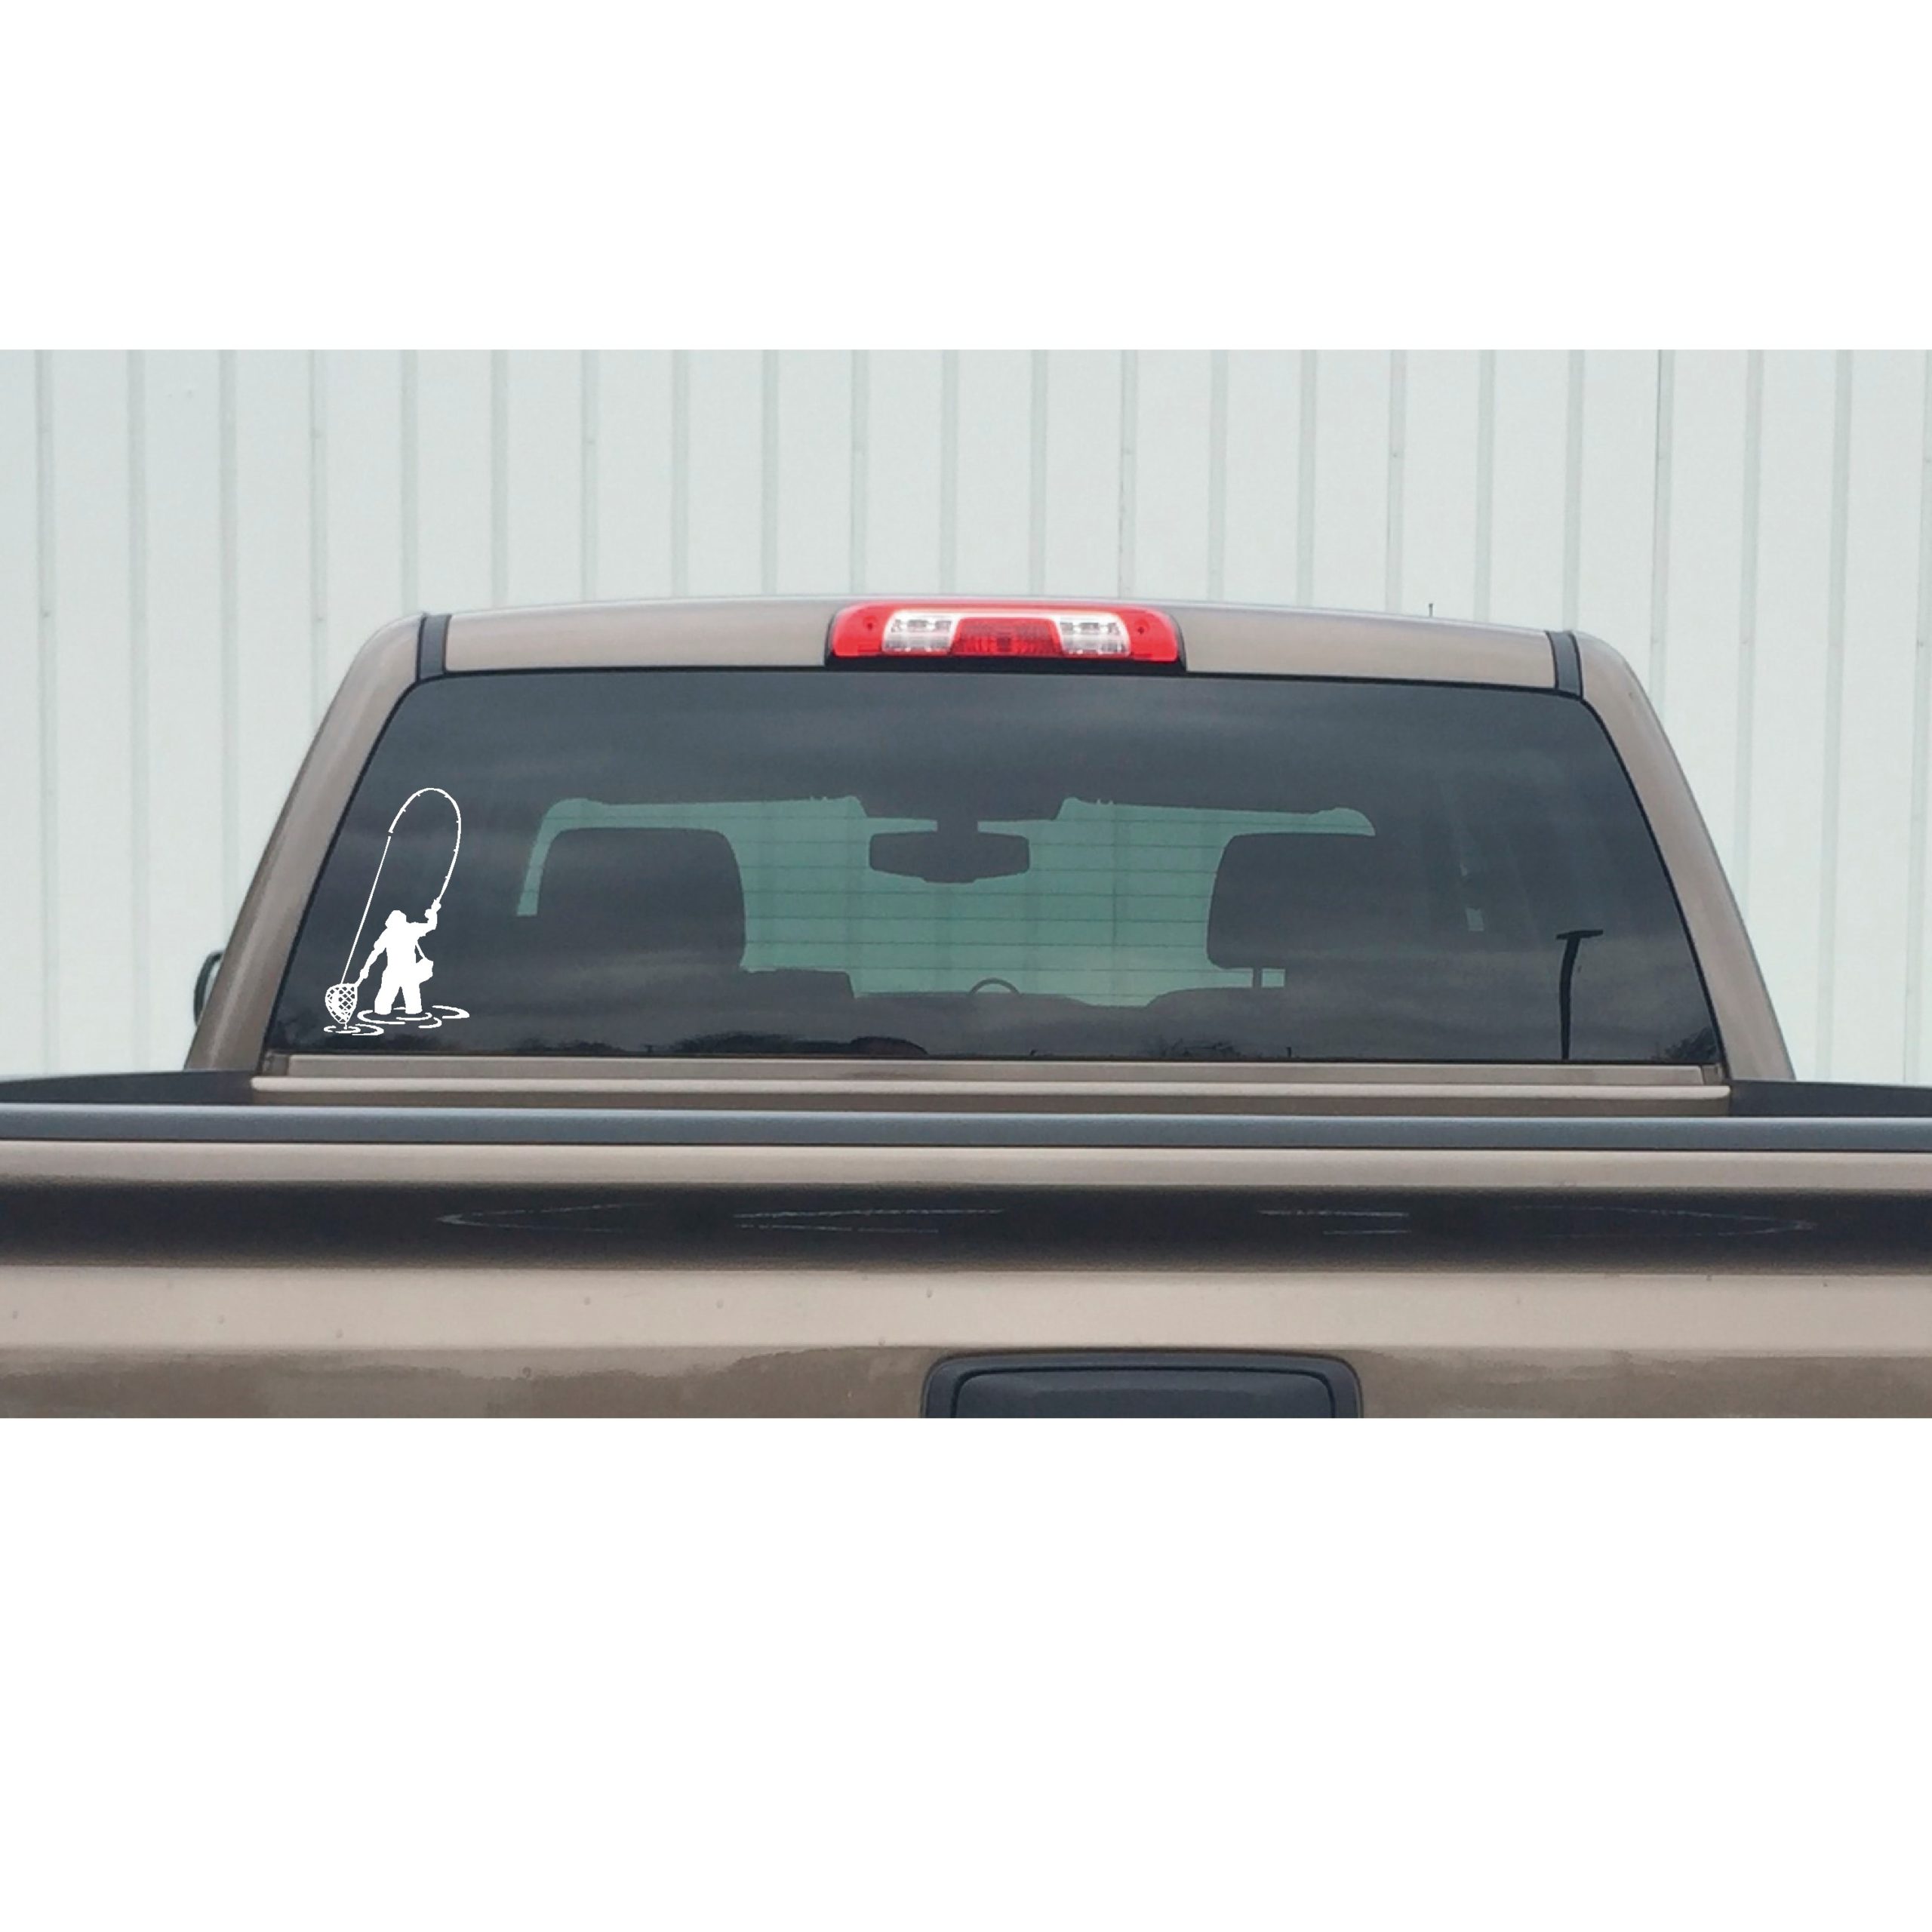 FGD Trout Fishing Car, Truck and Suv Window Decal Sticker 12″x8